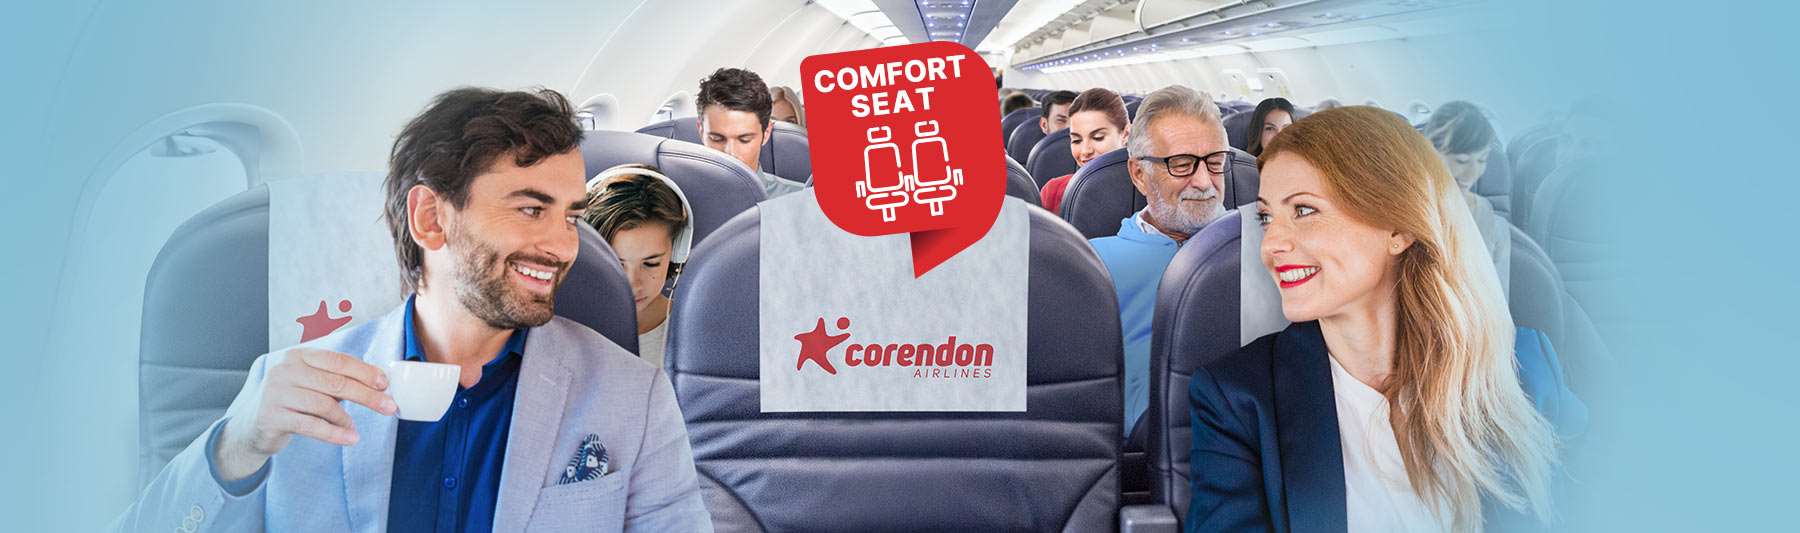 Enjoy the convenience ensured by our 'Comfort seats' - Corendon Airlines